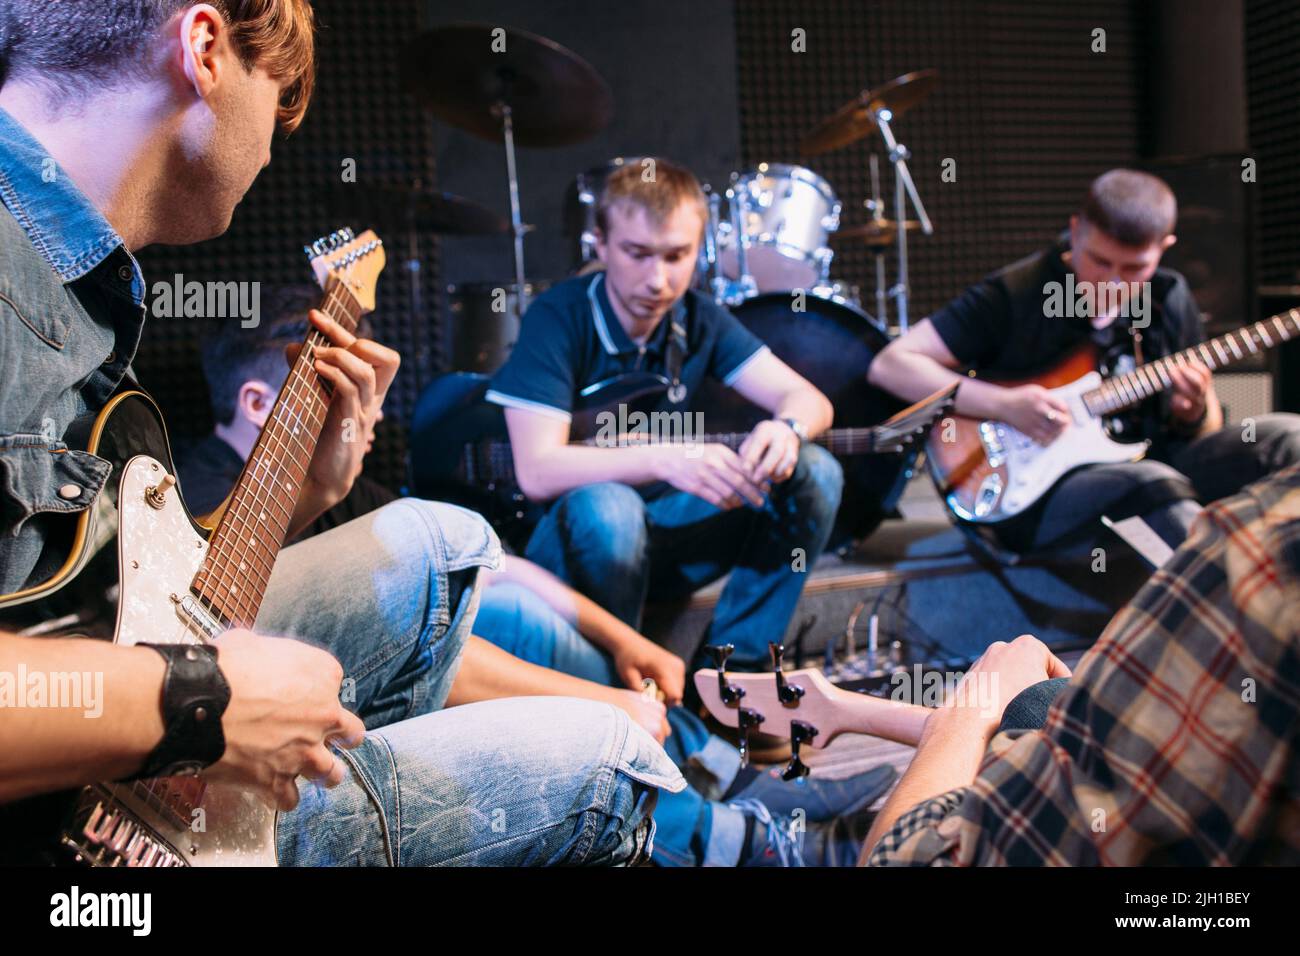 Band rehearsal before a live performance Stock Photo